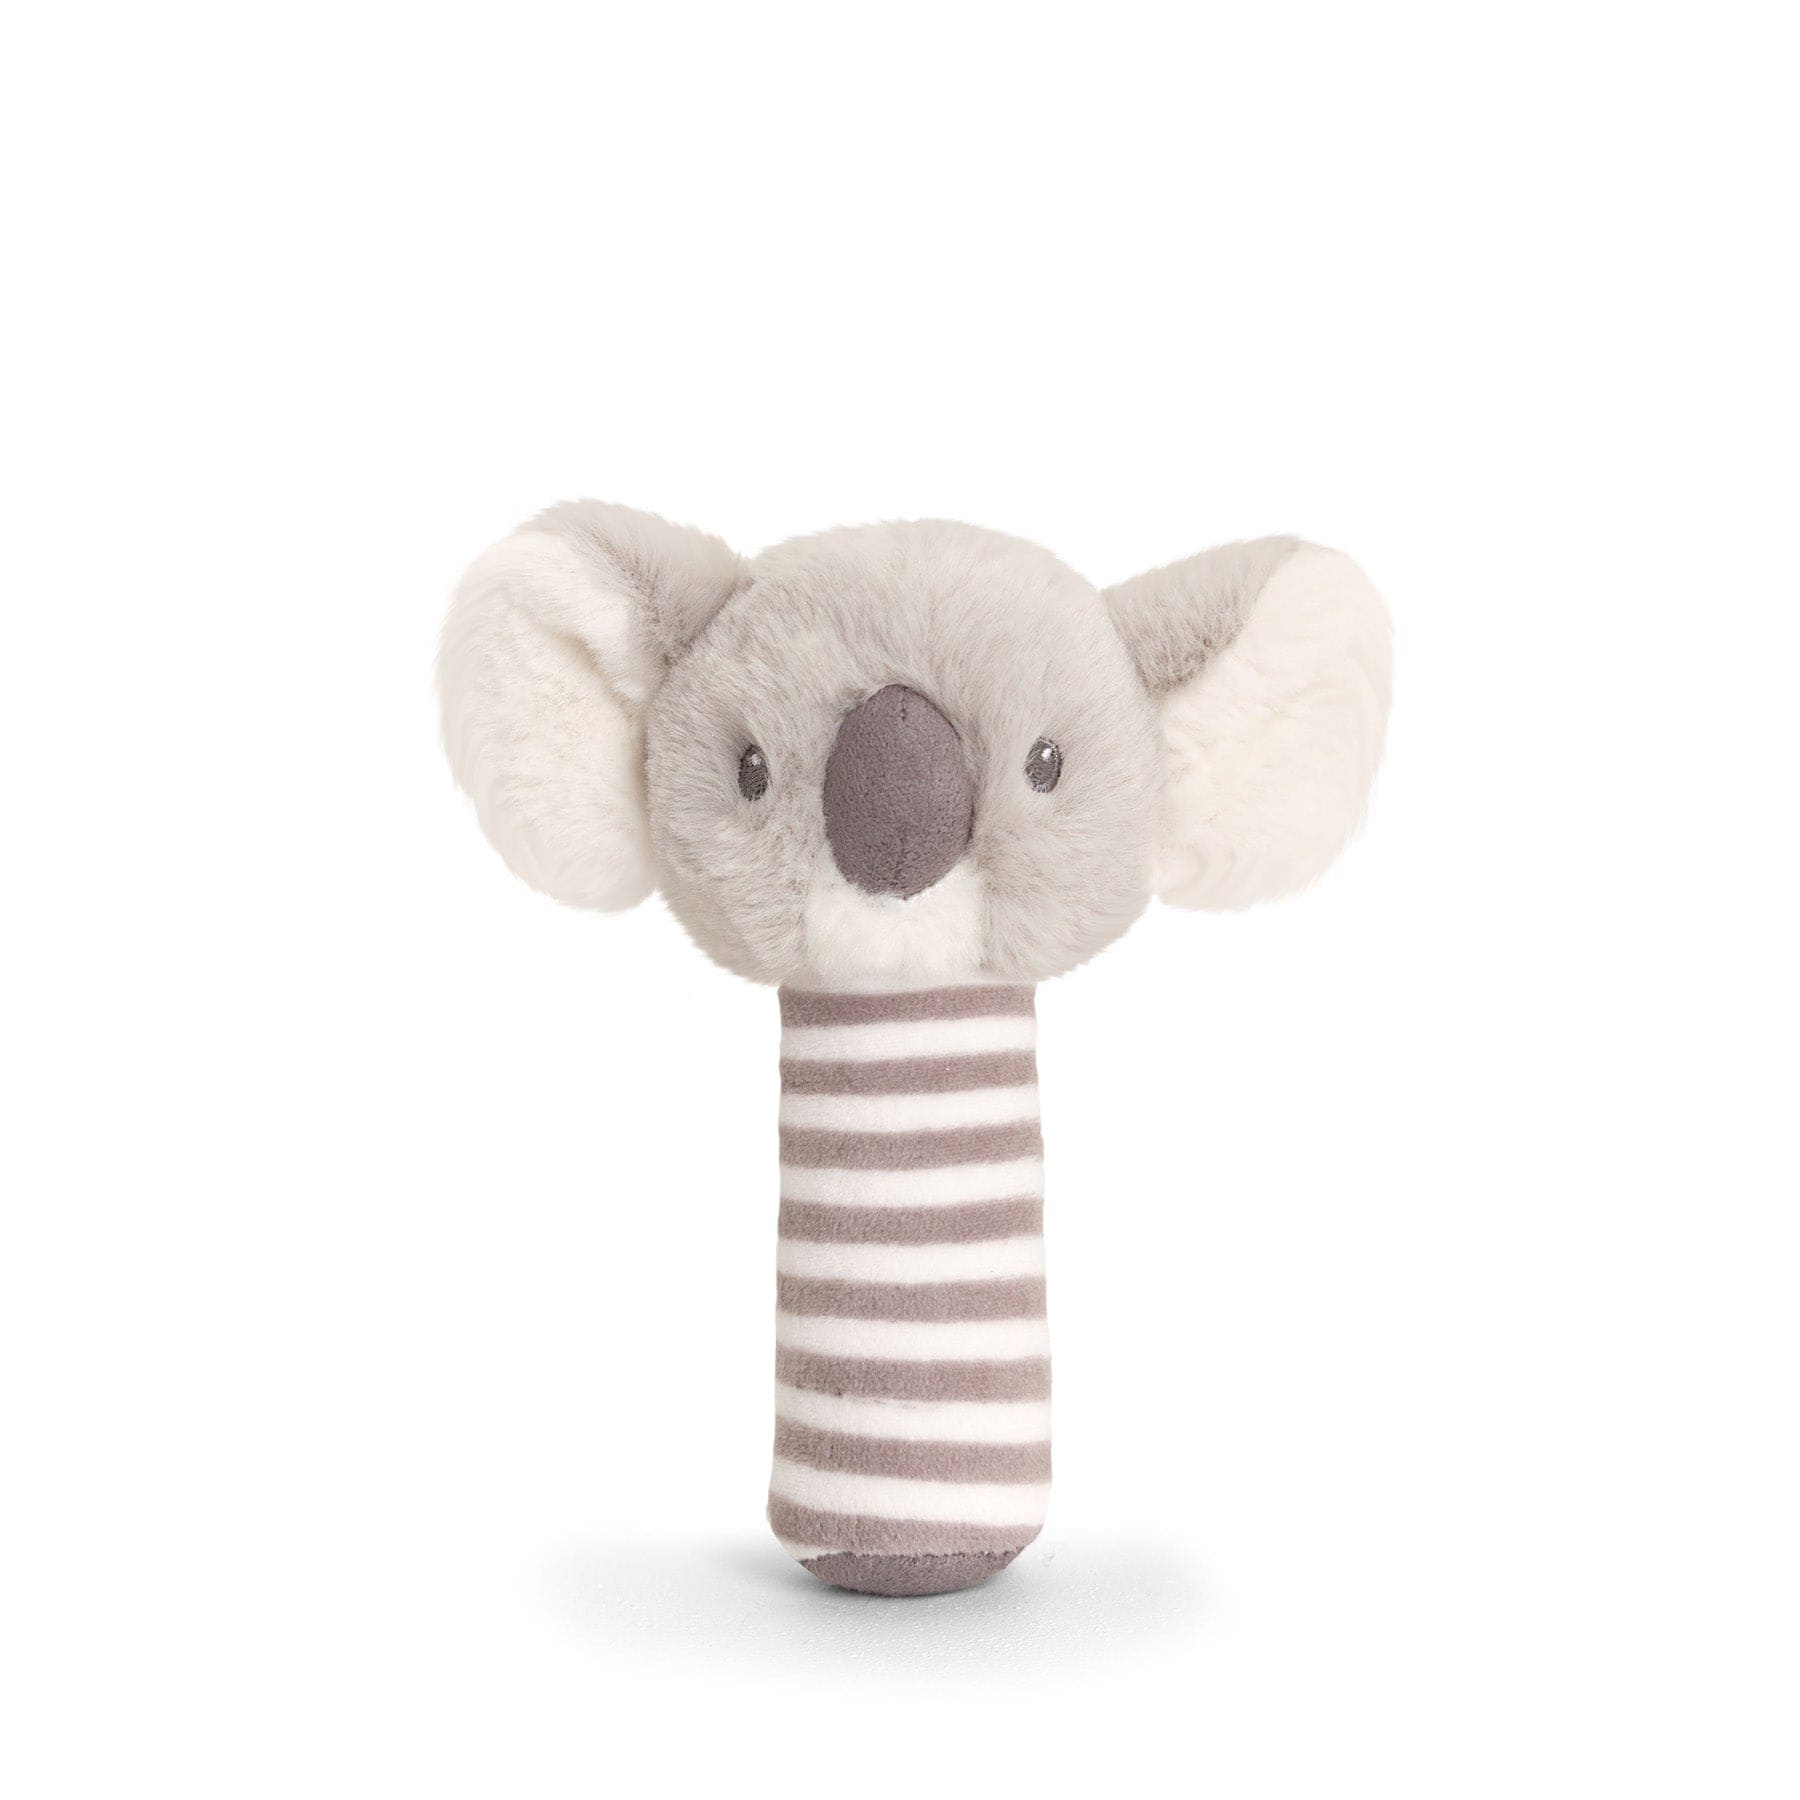 Plush koala toy with striped body and fluffy ears on white background